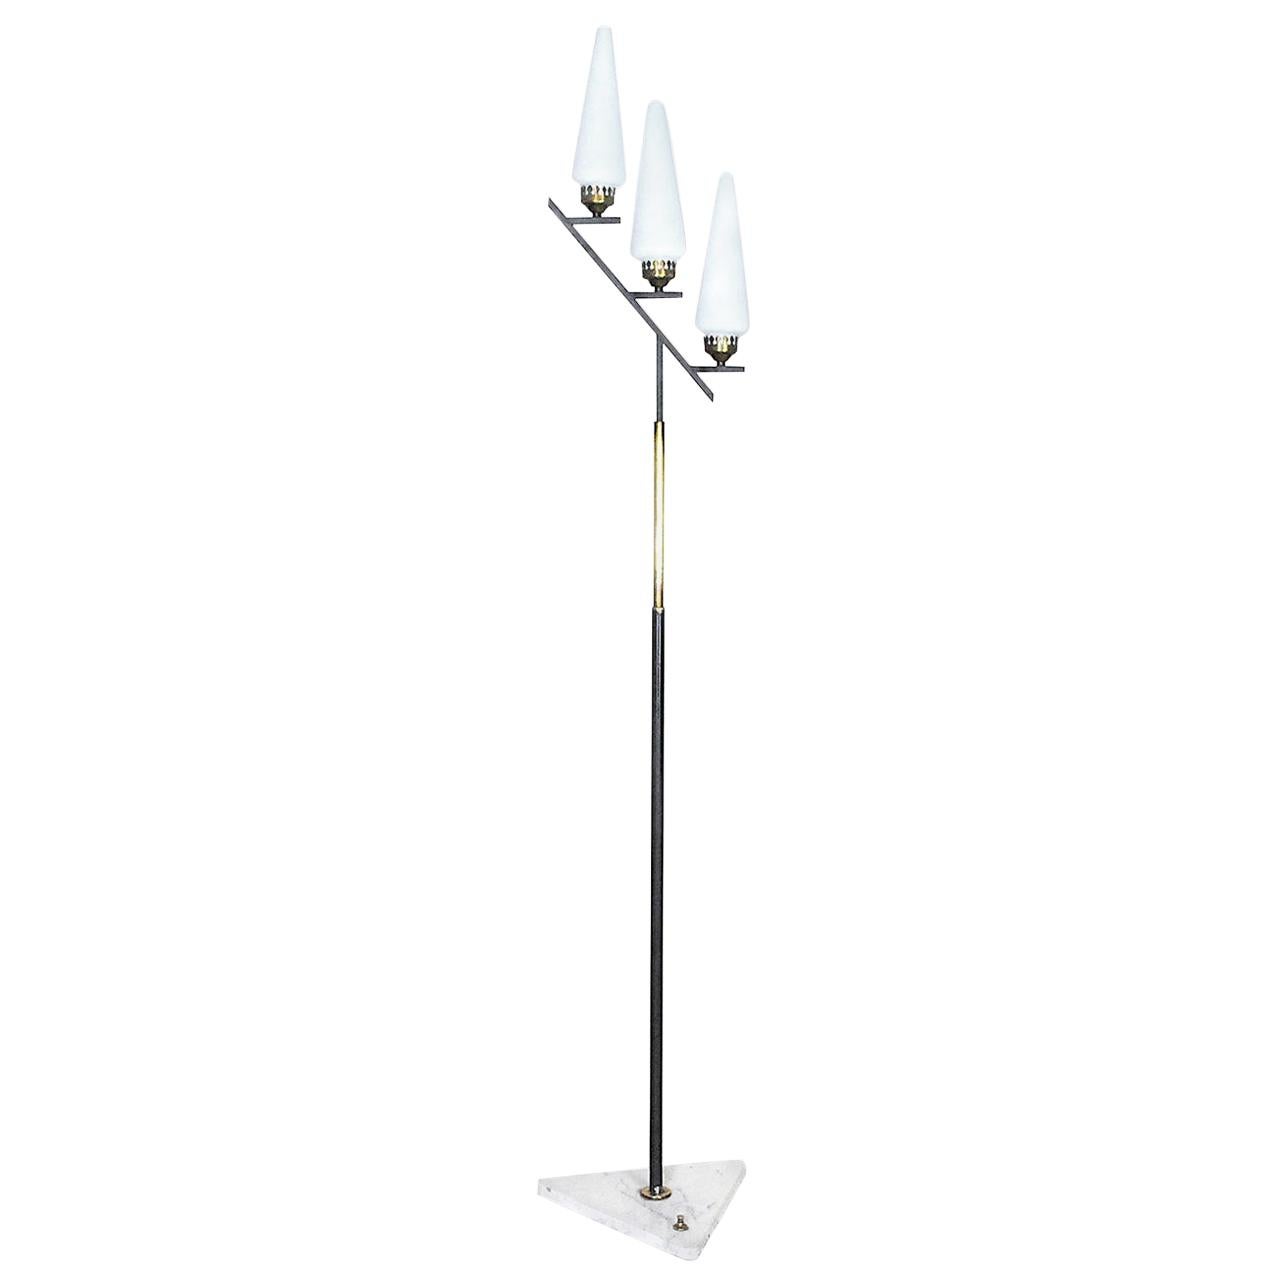 Stilnovo Italian Midcentury Floor Lamp in Brass and Opaline from the 1950s For Sale